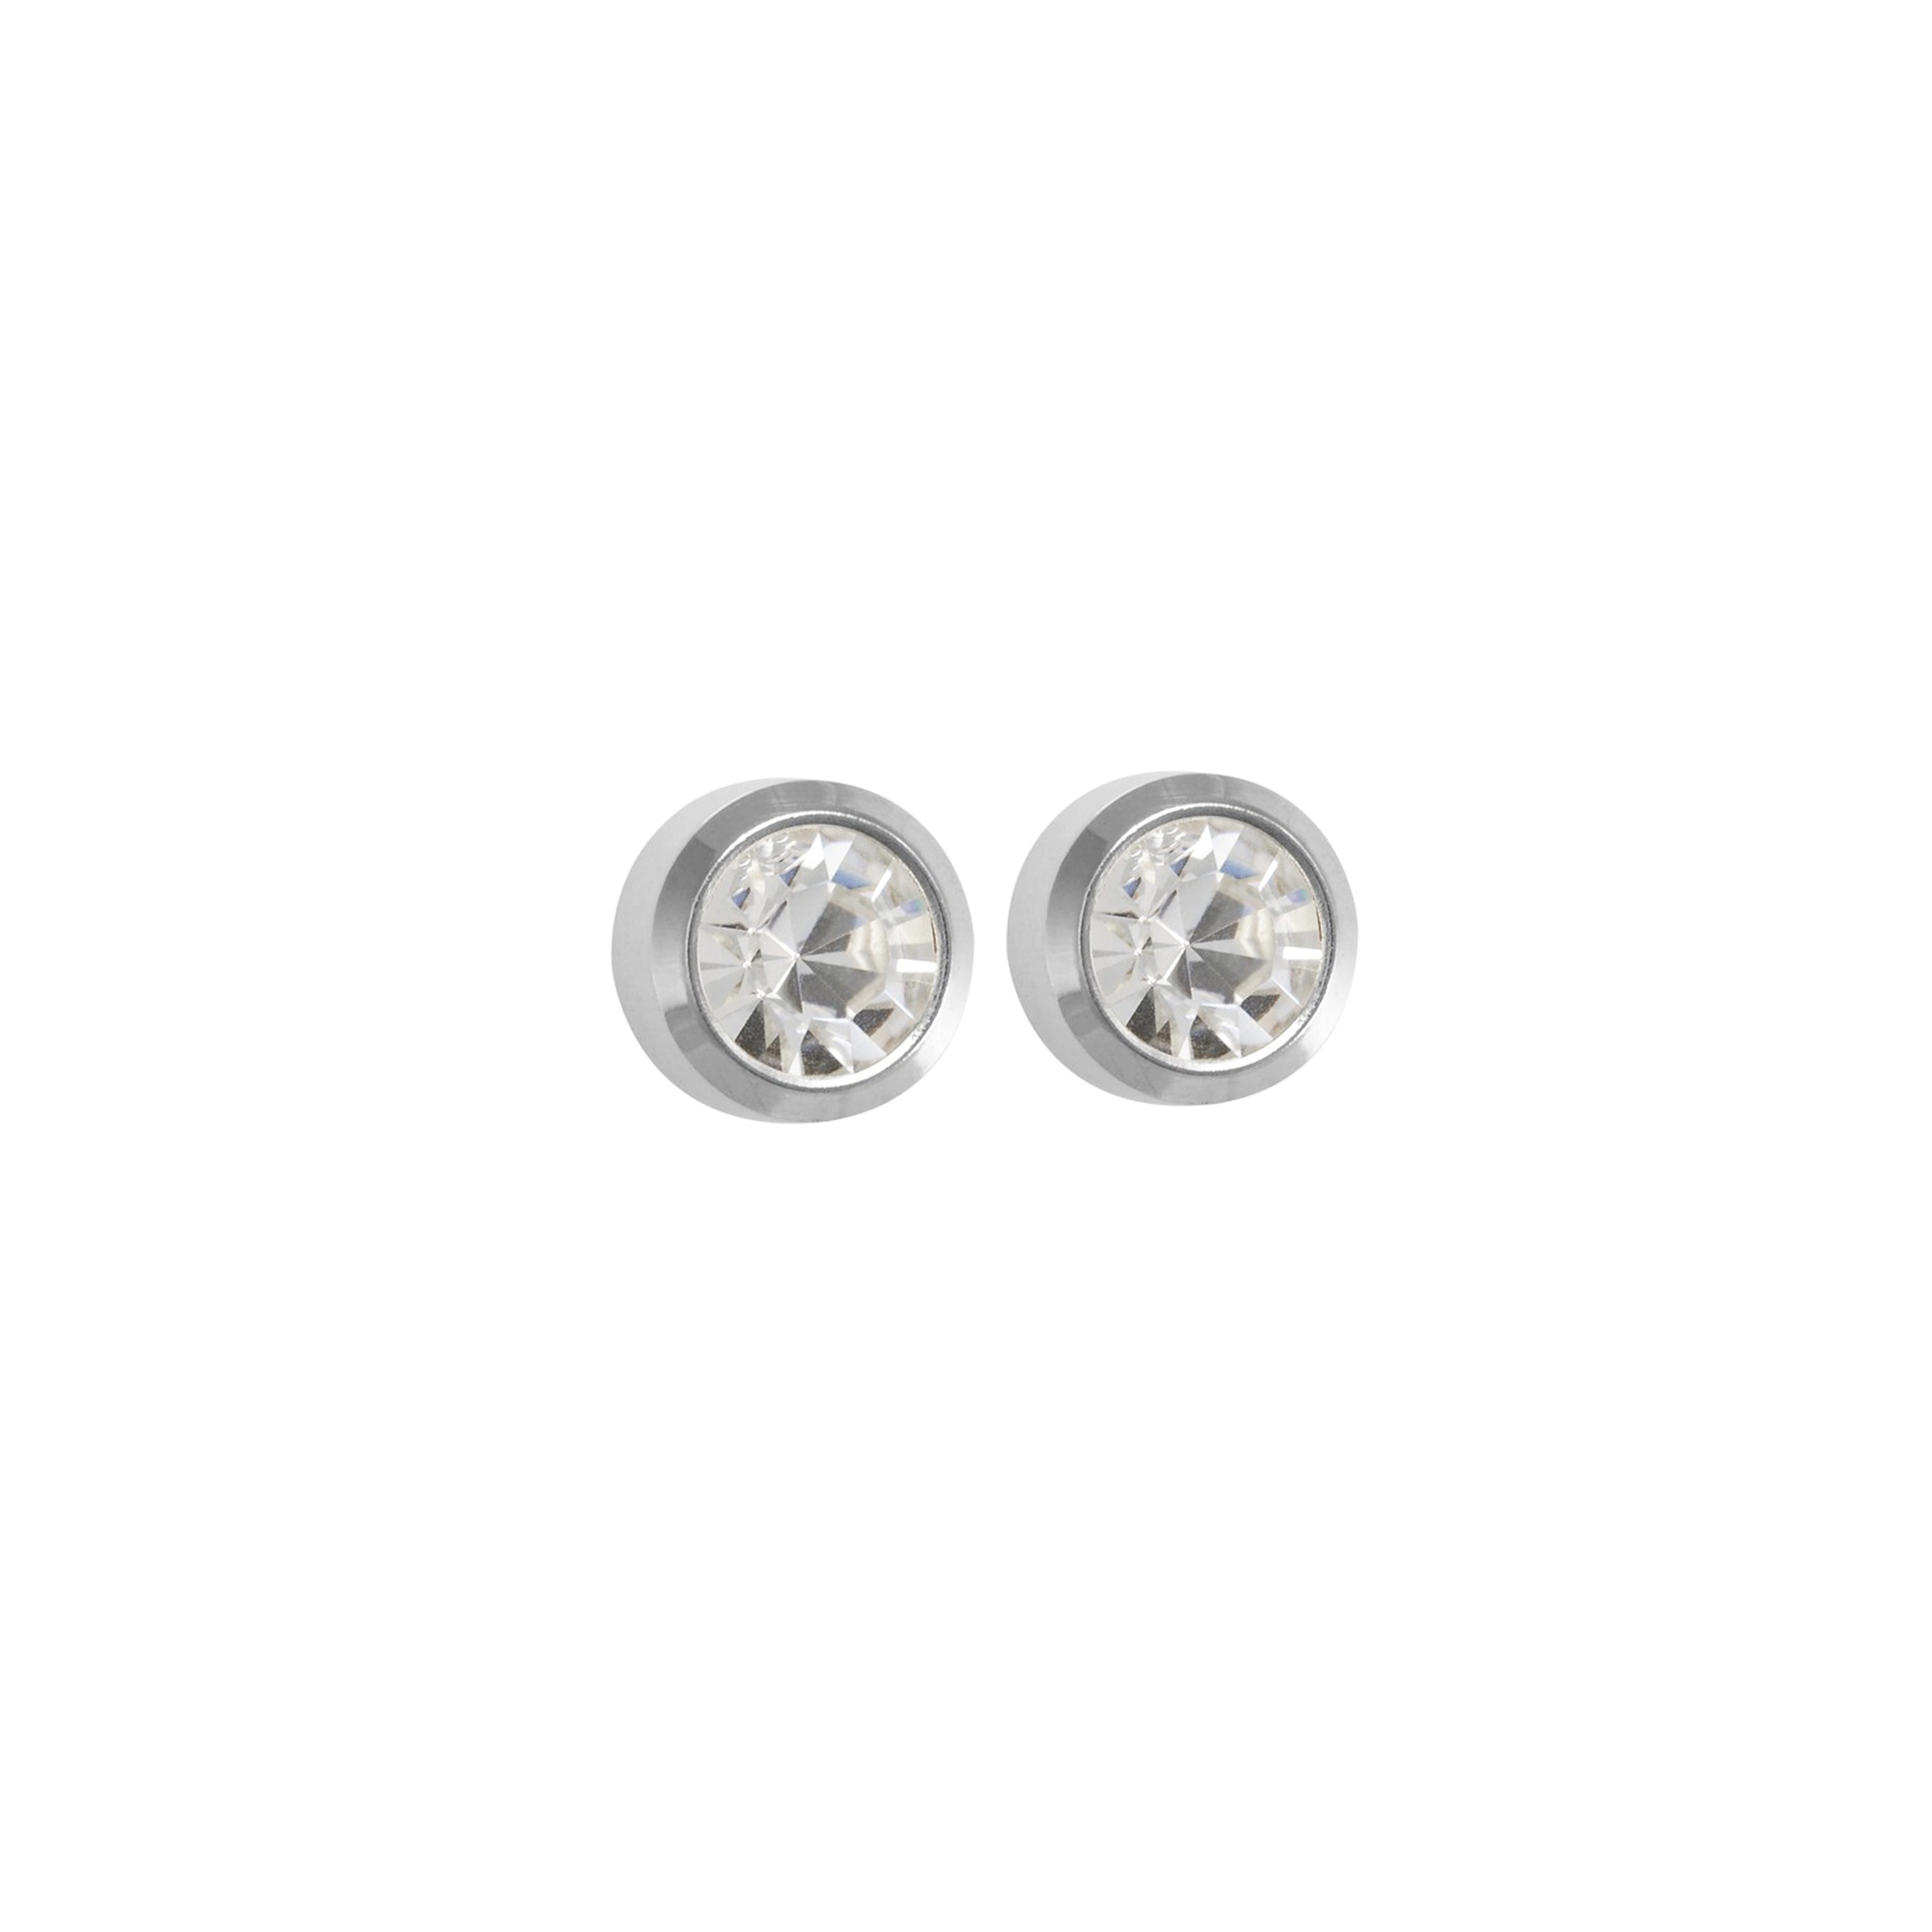 2MM - Bezel - April Crystal | Stainless Steel Piercing Ear Studs come Fashion Earrings | Studex Select